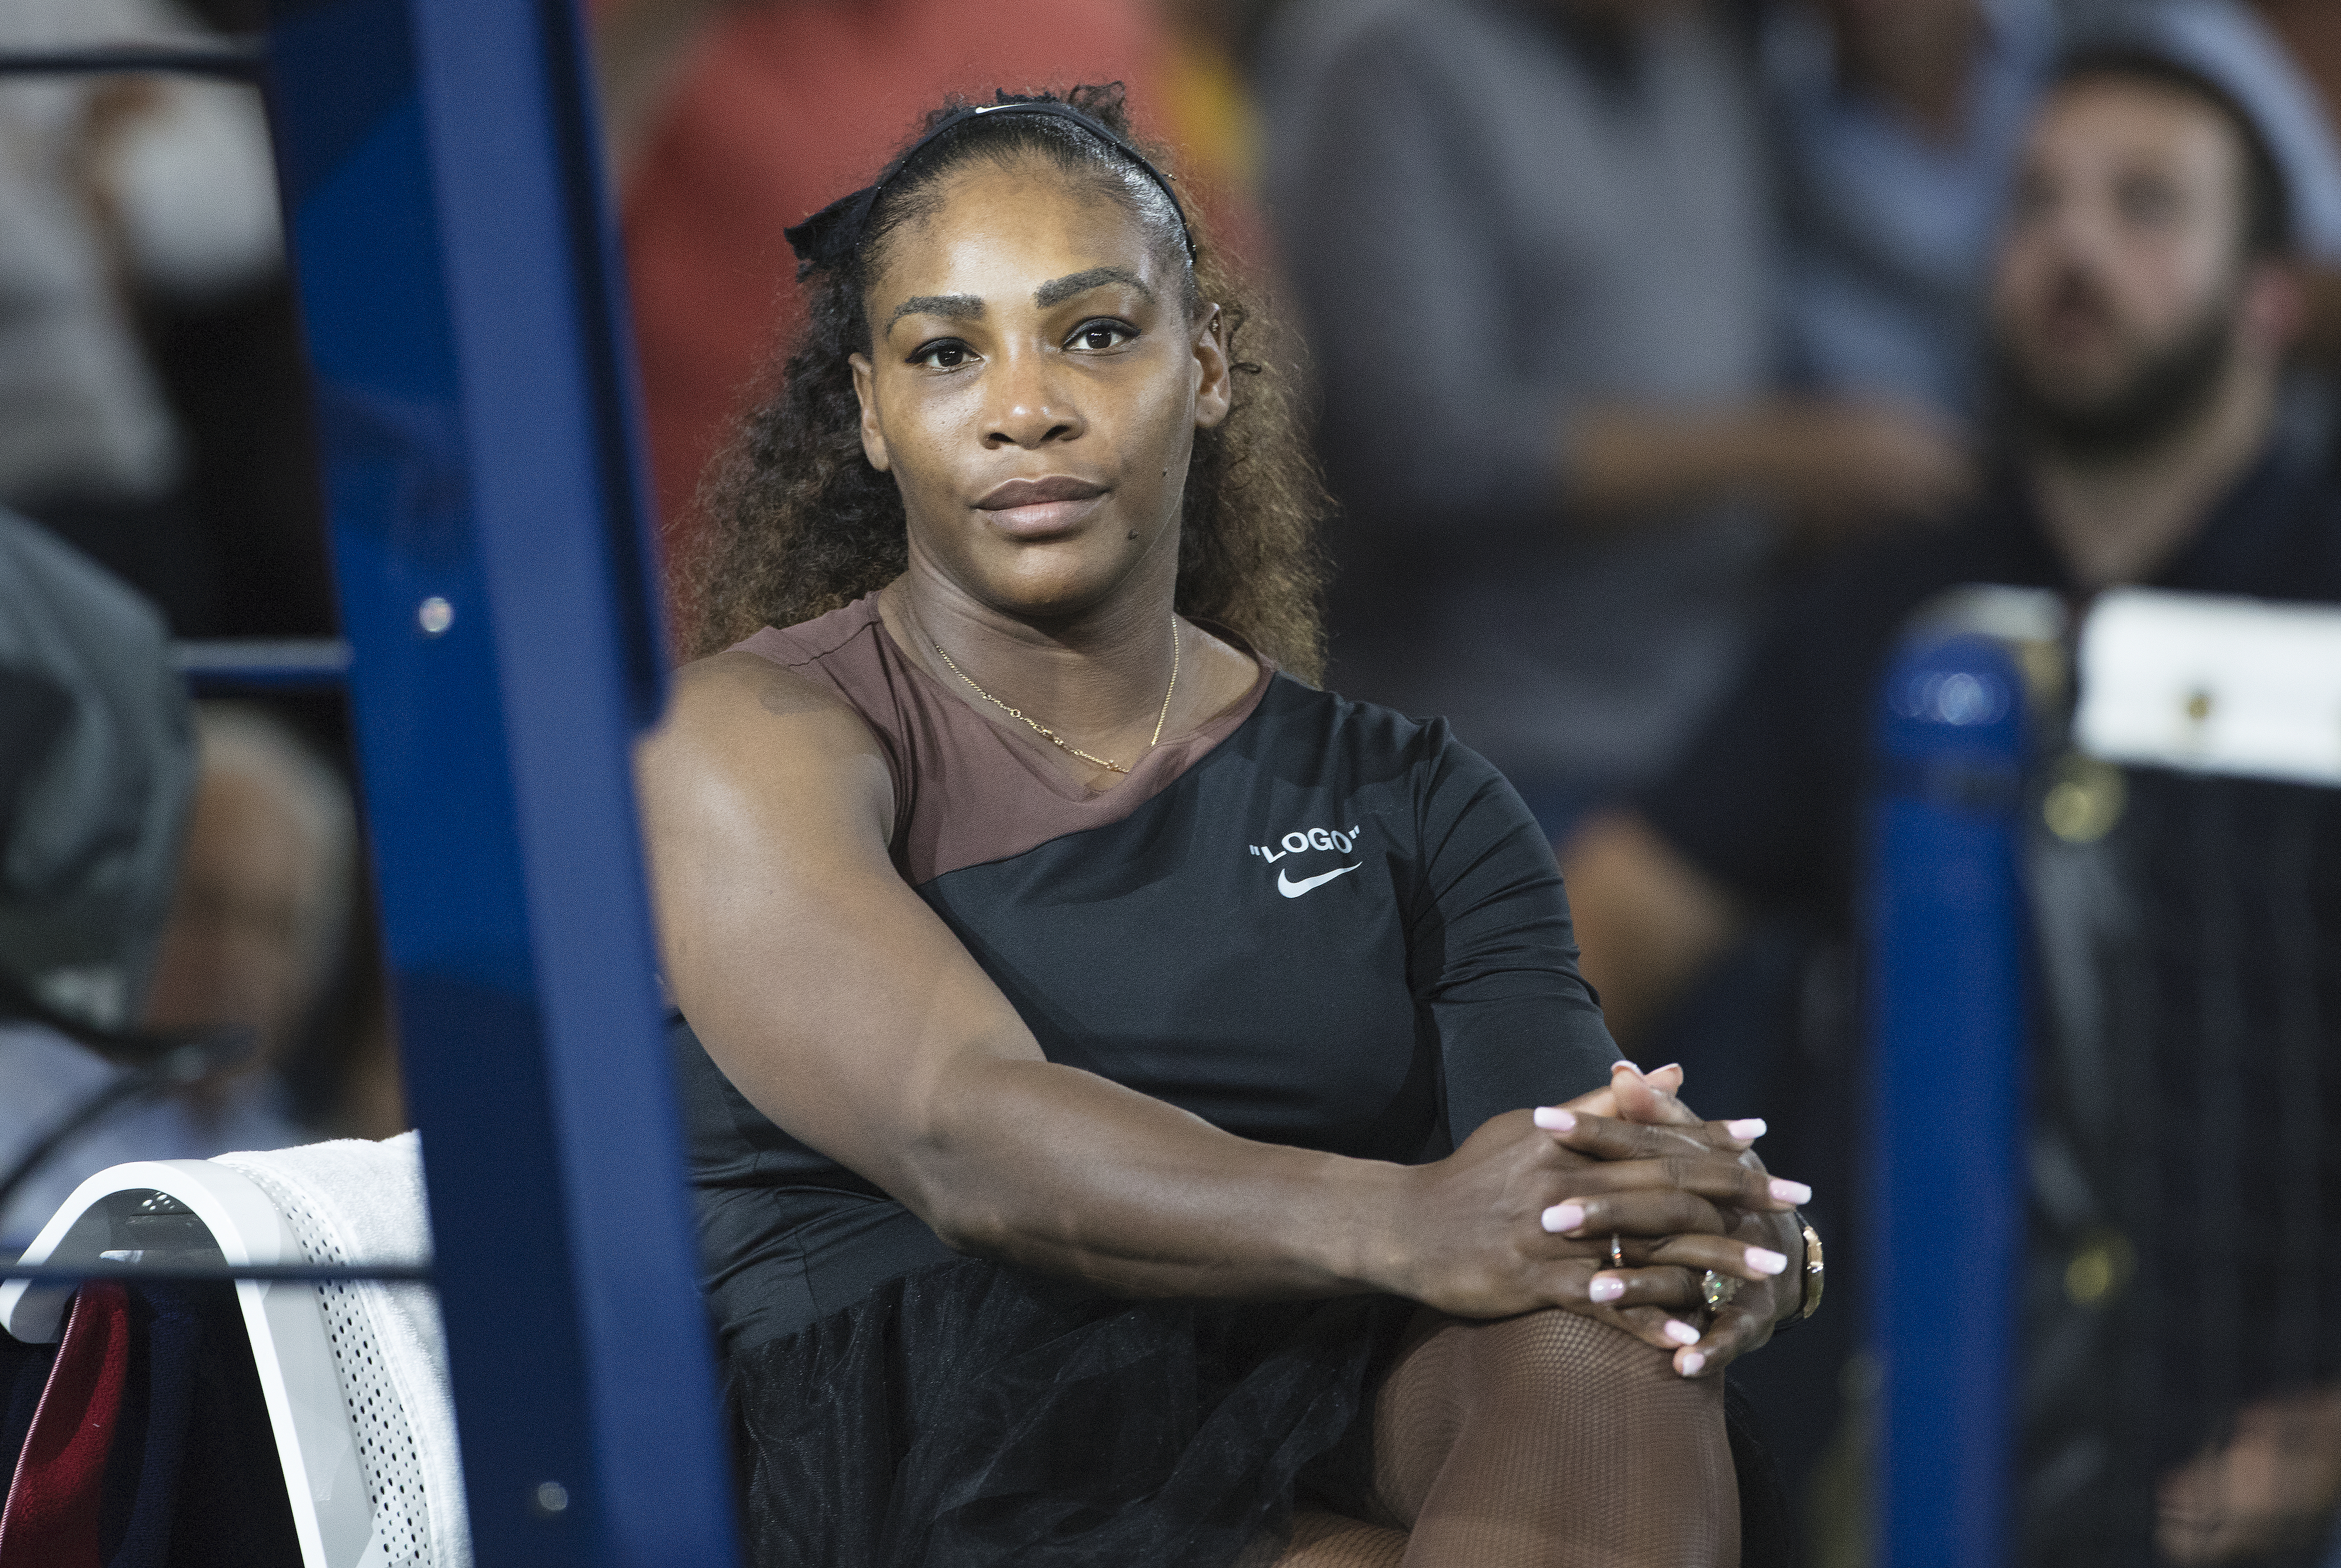 Serena sitting and wearing an off-the-shoulder athletic outfit